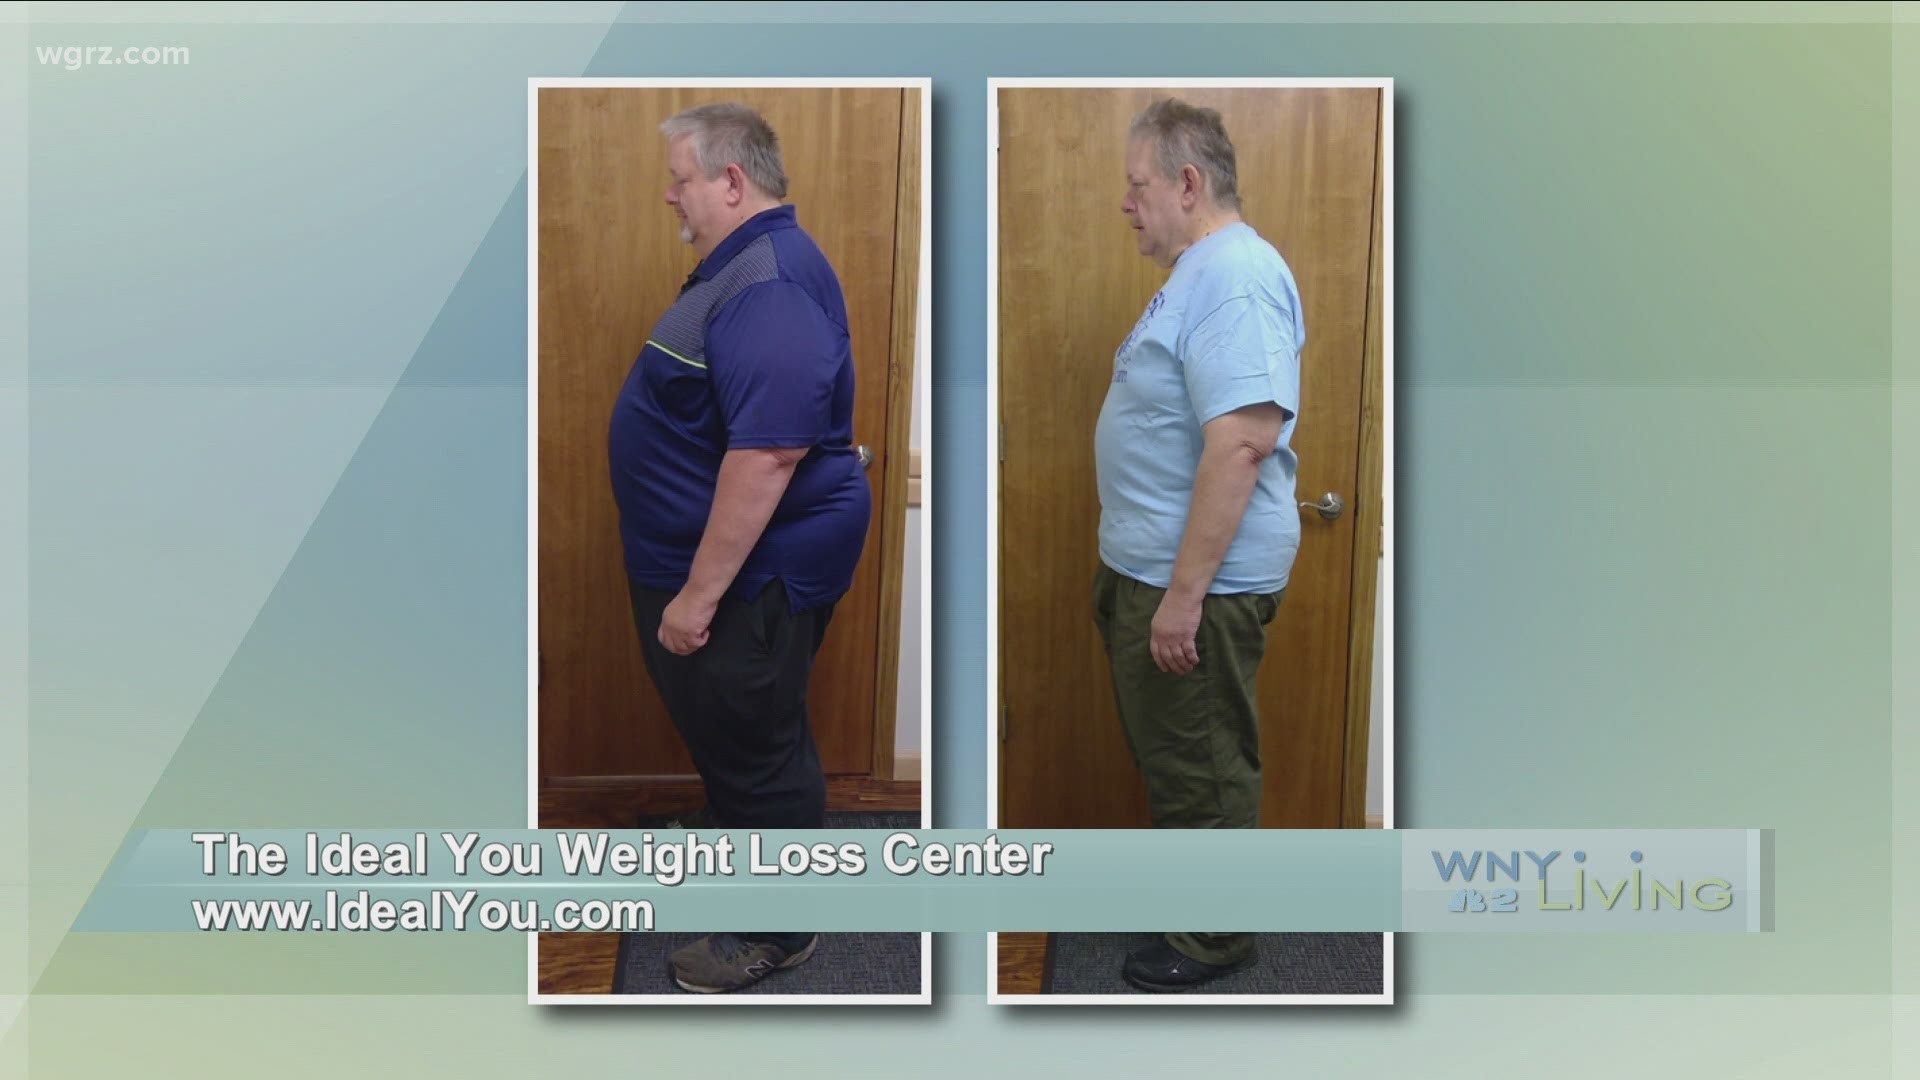 WNY Living - January 23 - The Ideal You Weight Loss Center (THIS VIDEO IS SPONSORED BY THE IDEAL YOU WEIGHT LOSS CENTER)